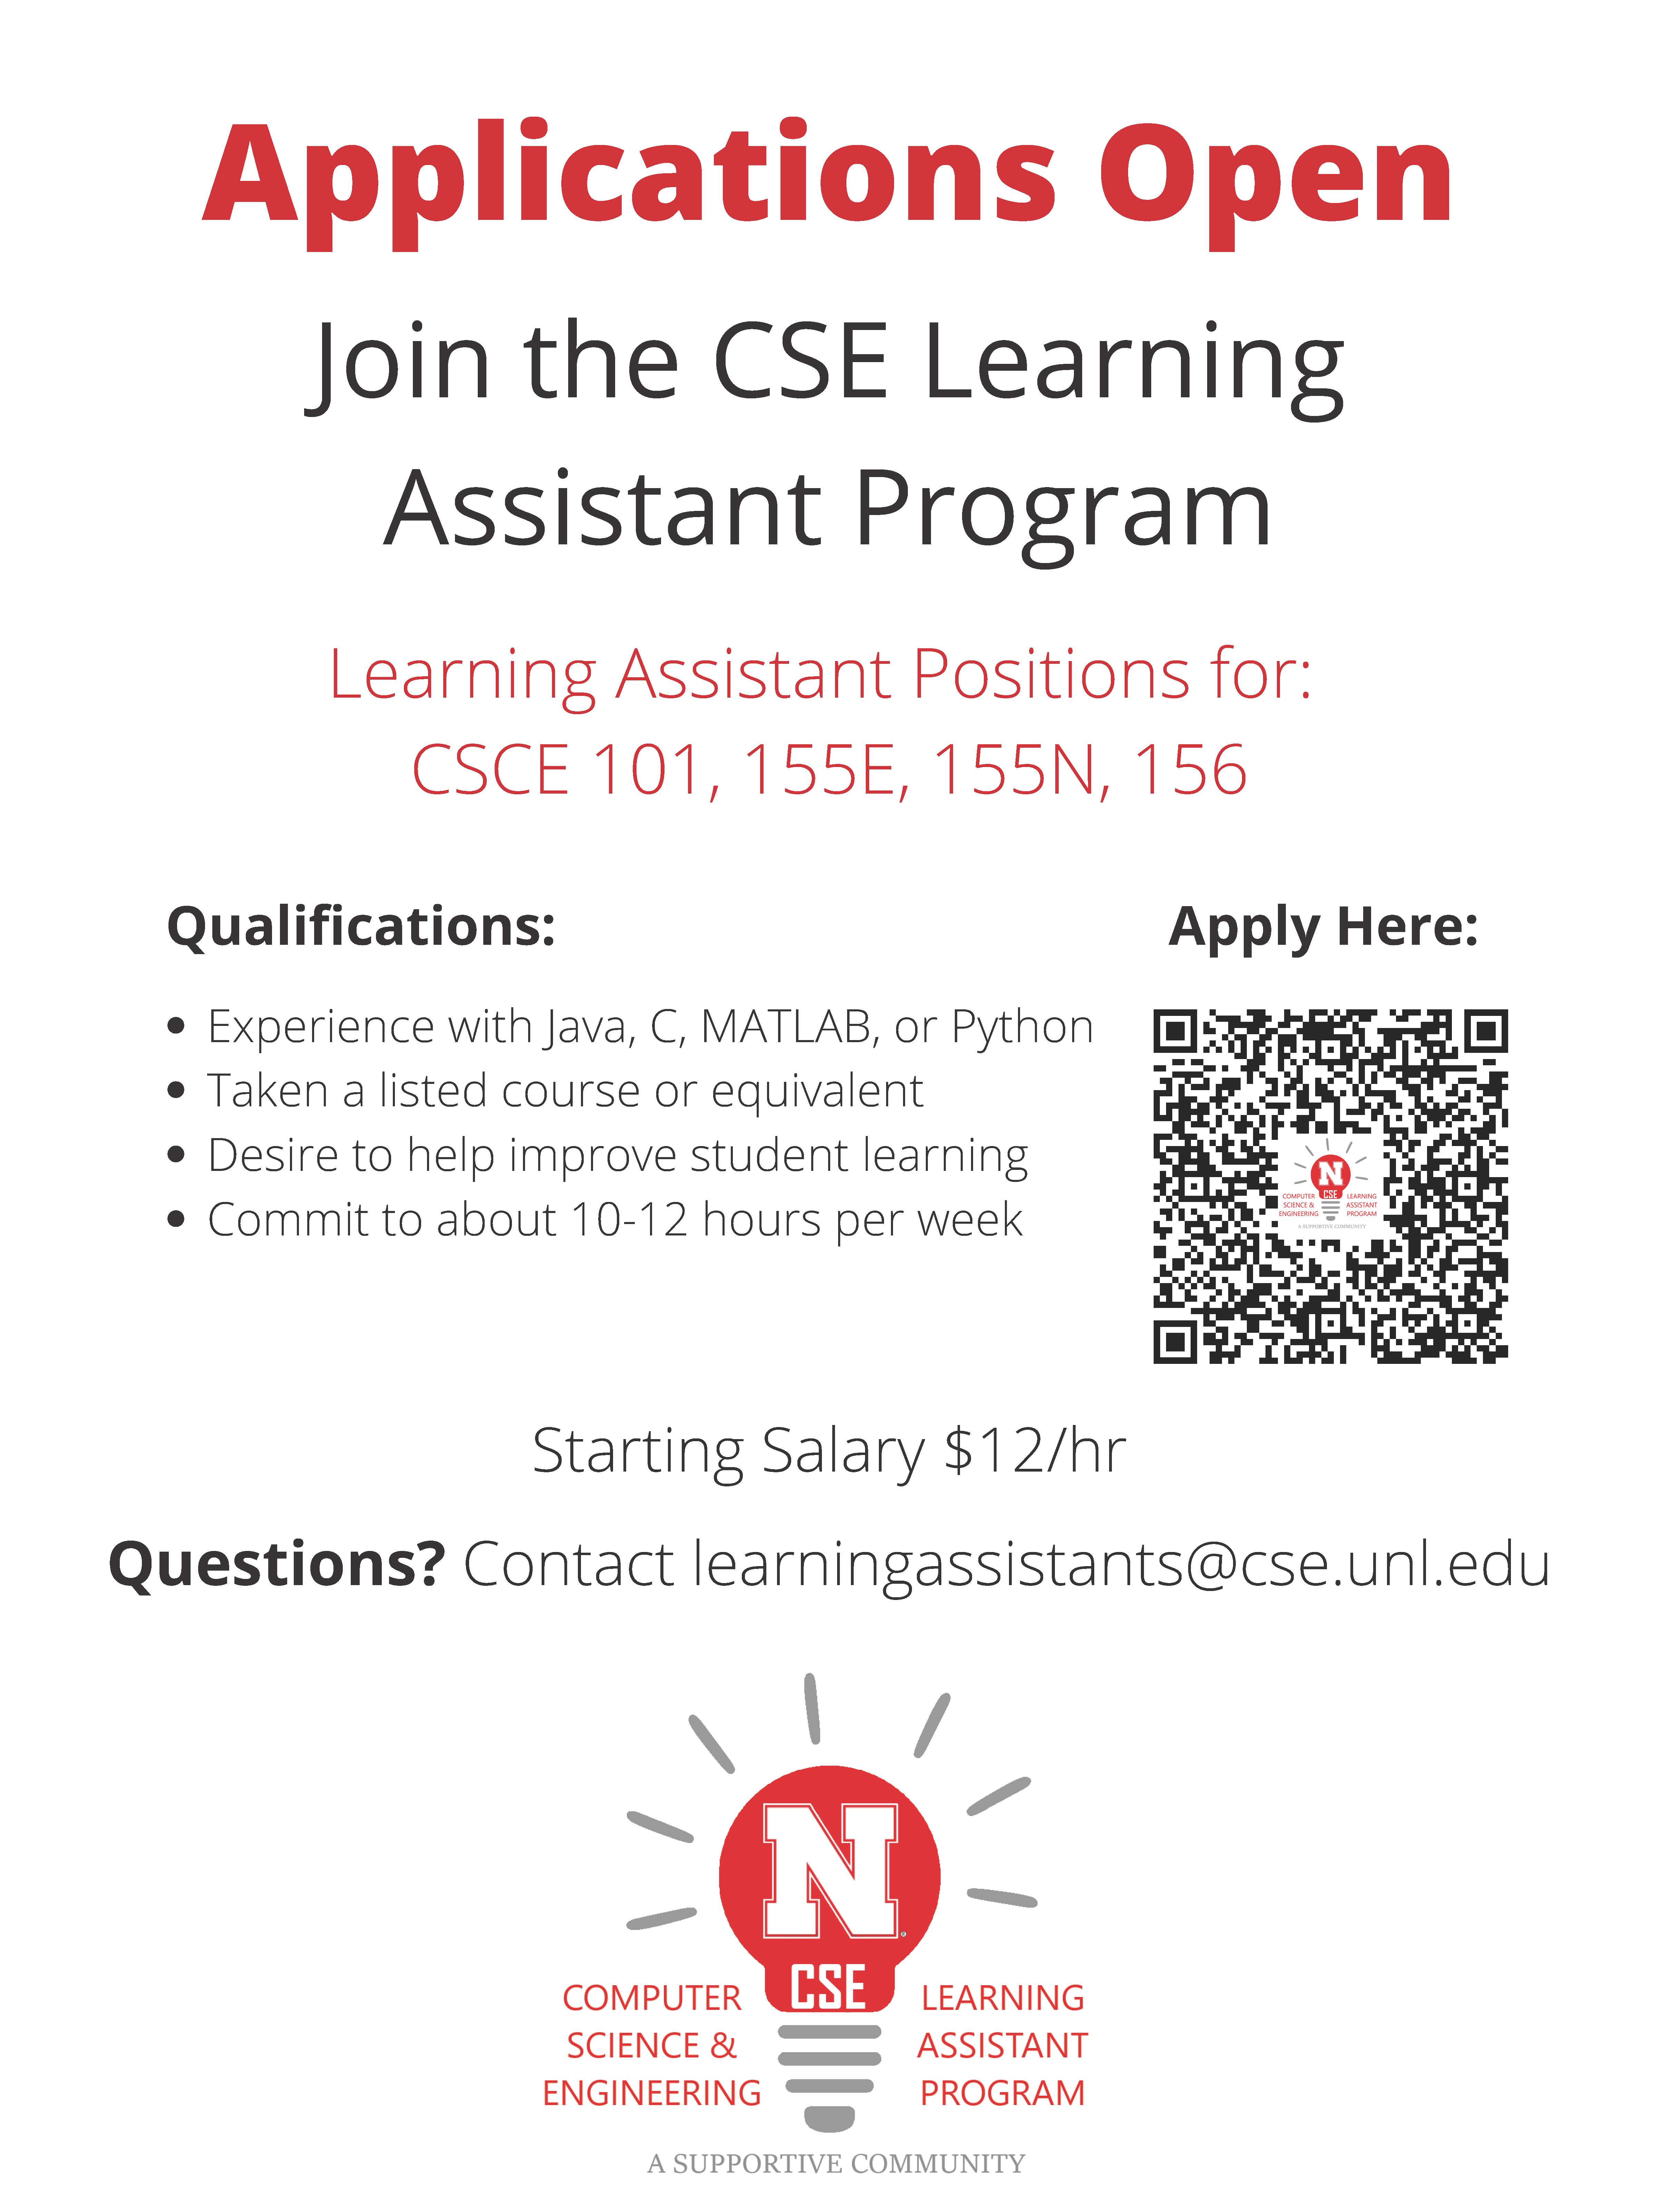 The CSE Learning Assistant Program